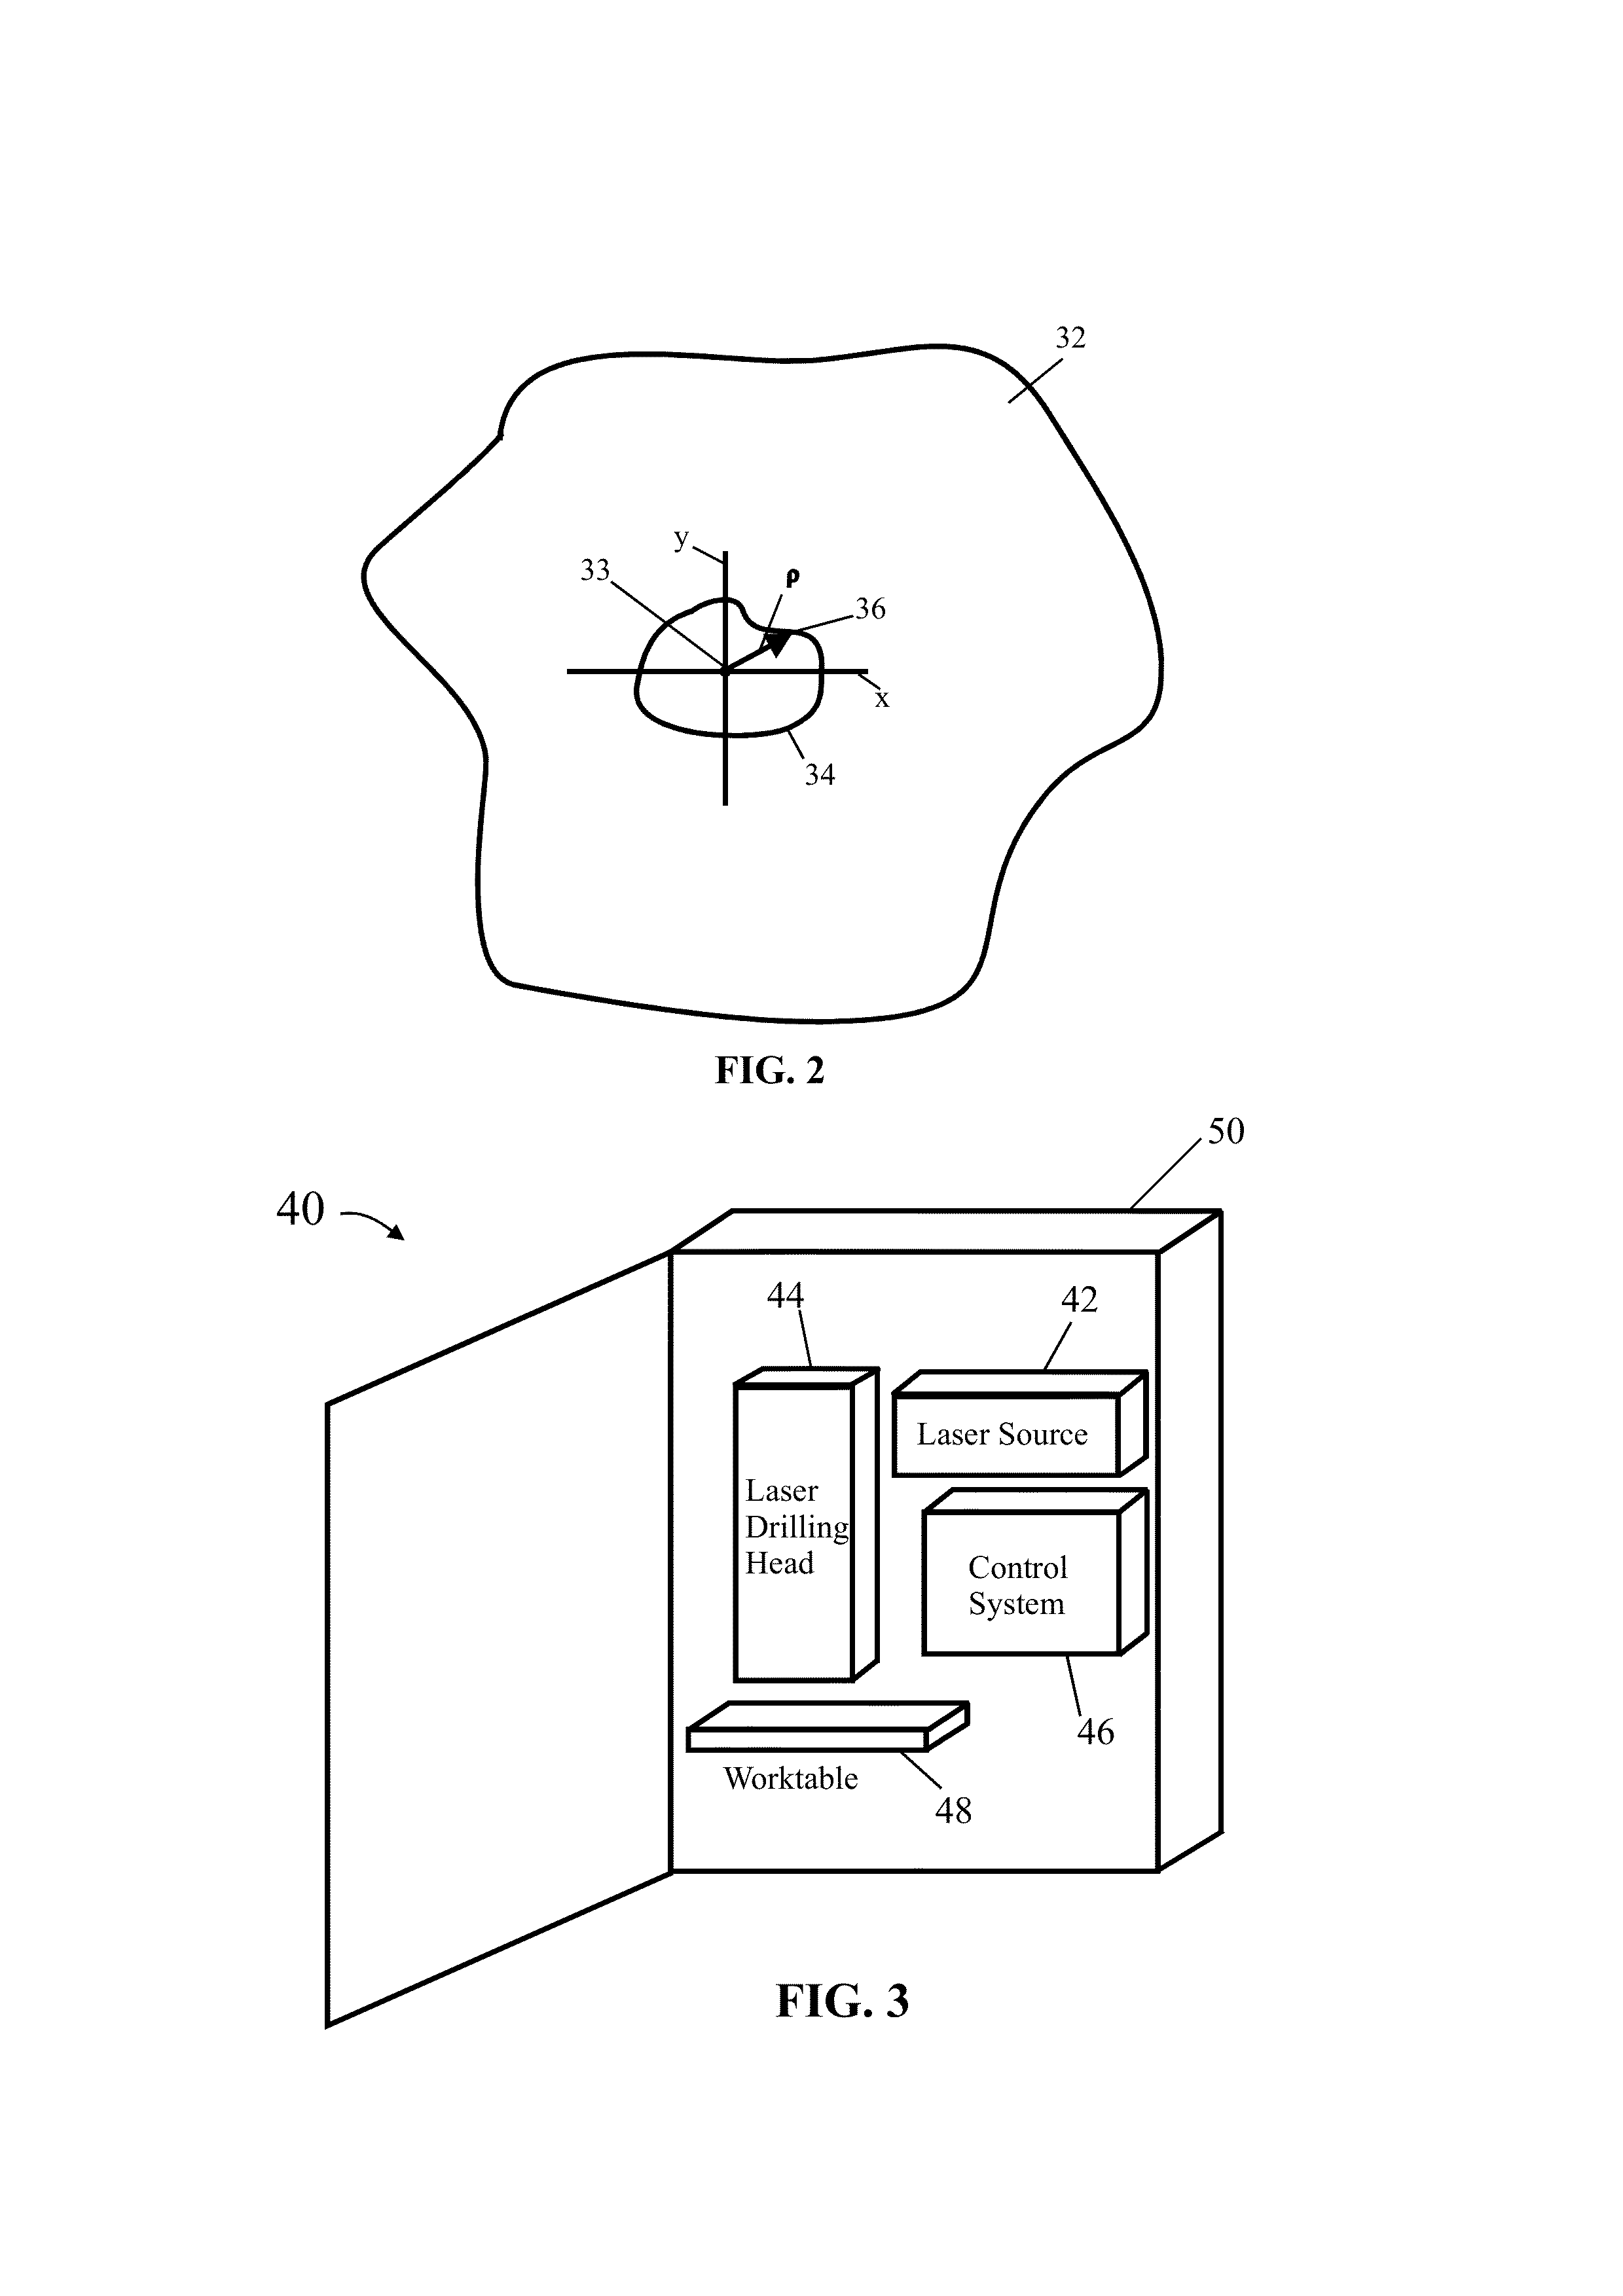 Laser Drilling and Trepanning Device